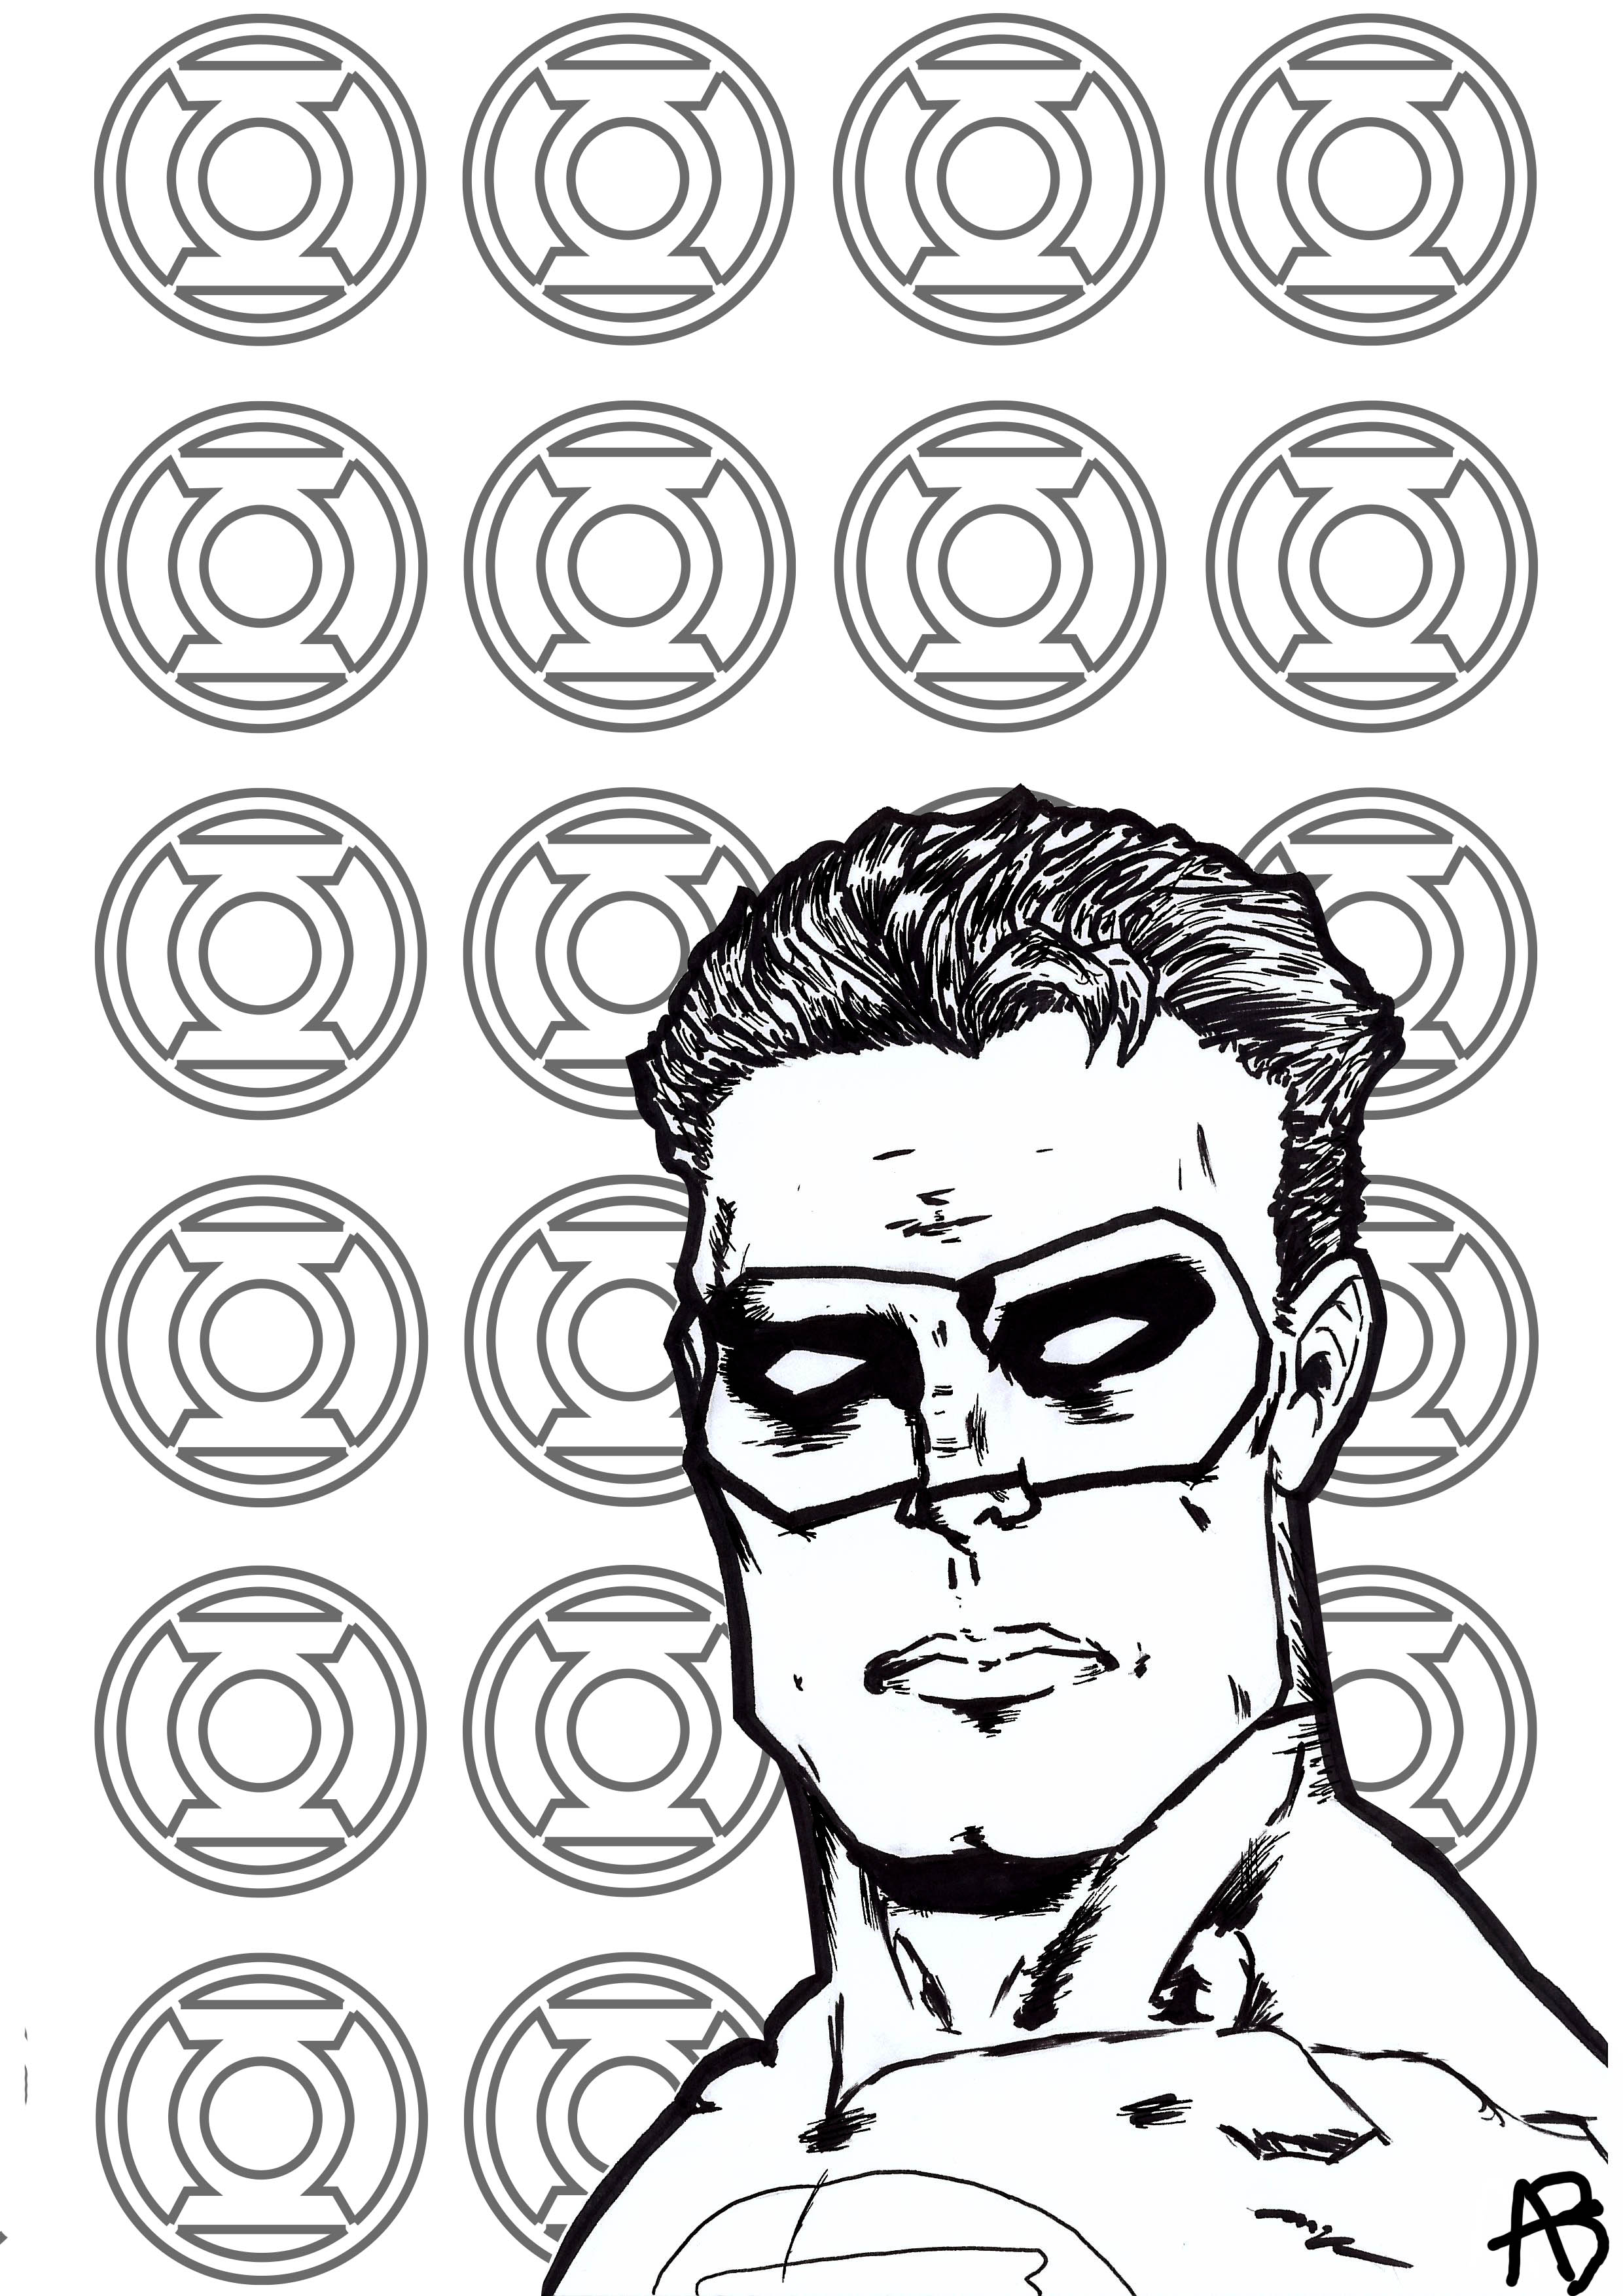 Coloring page inspired by Green Lantern (DC Comics character)